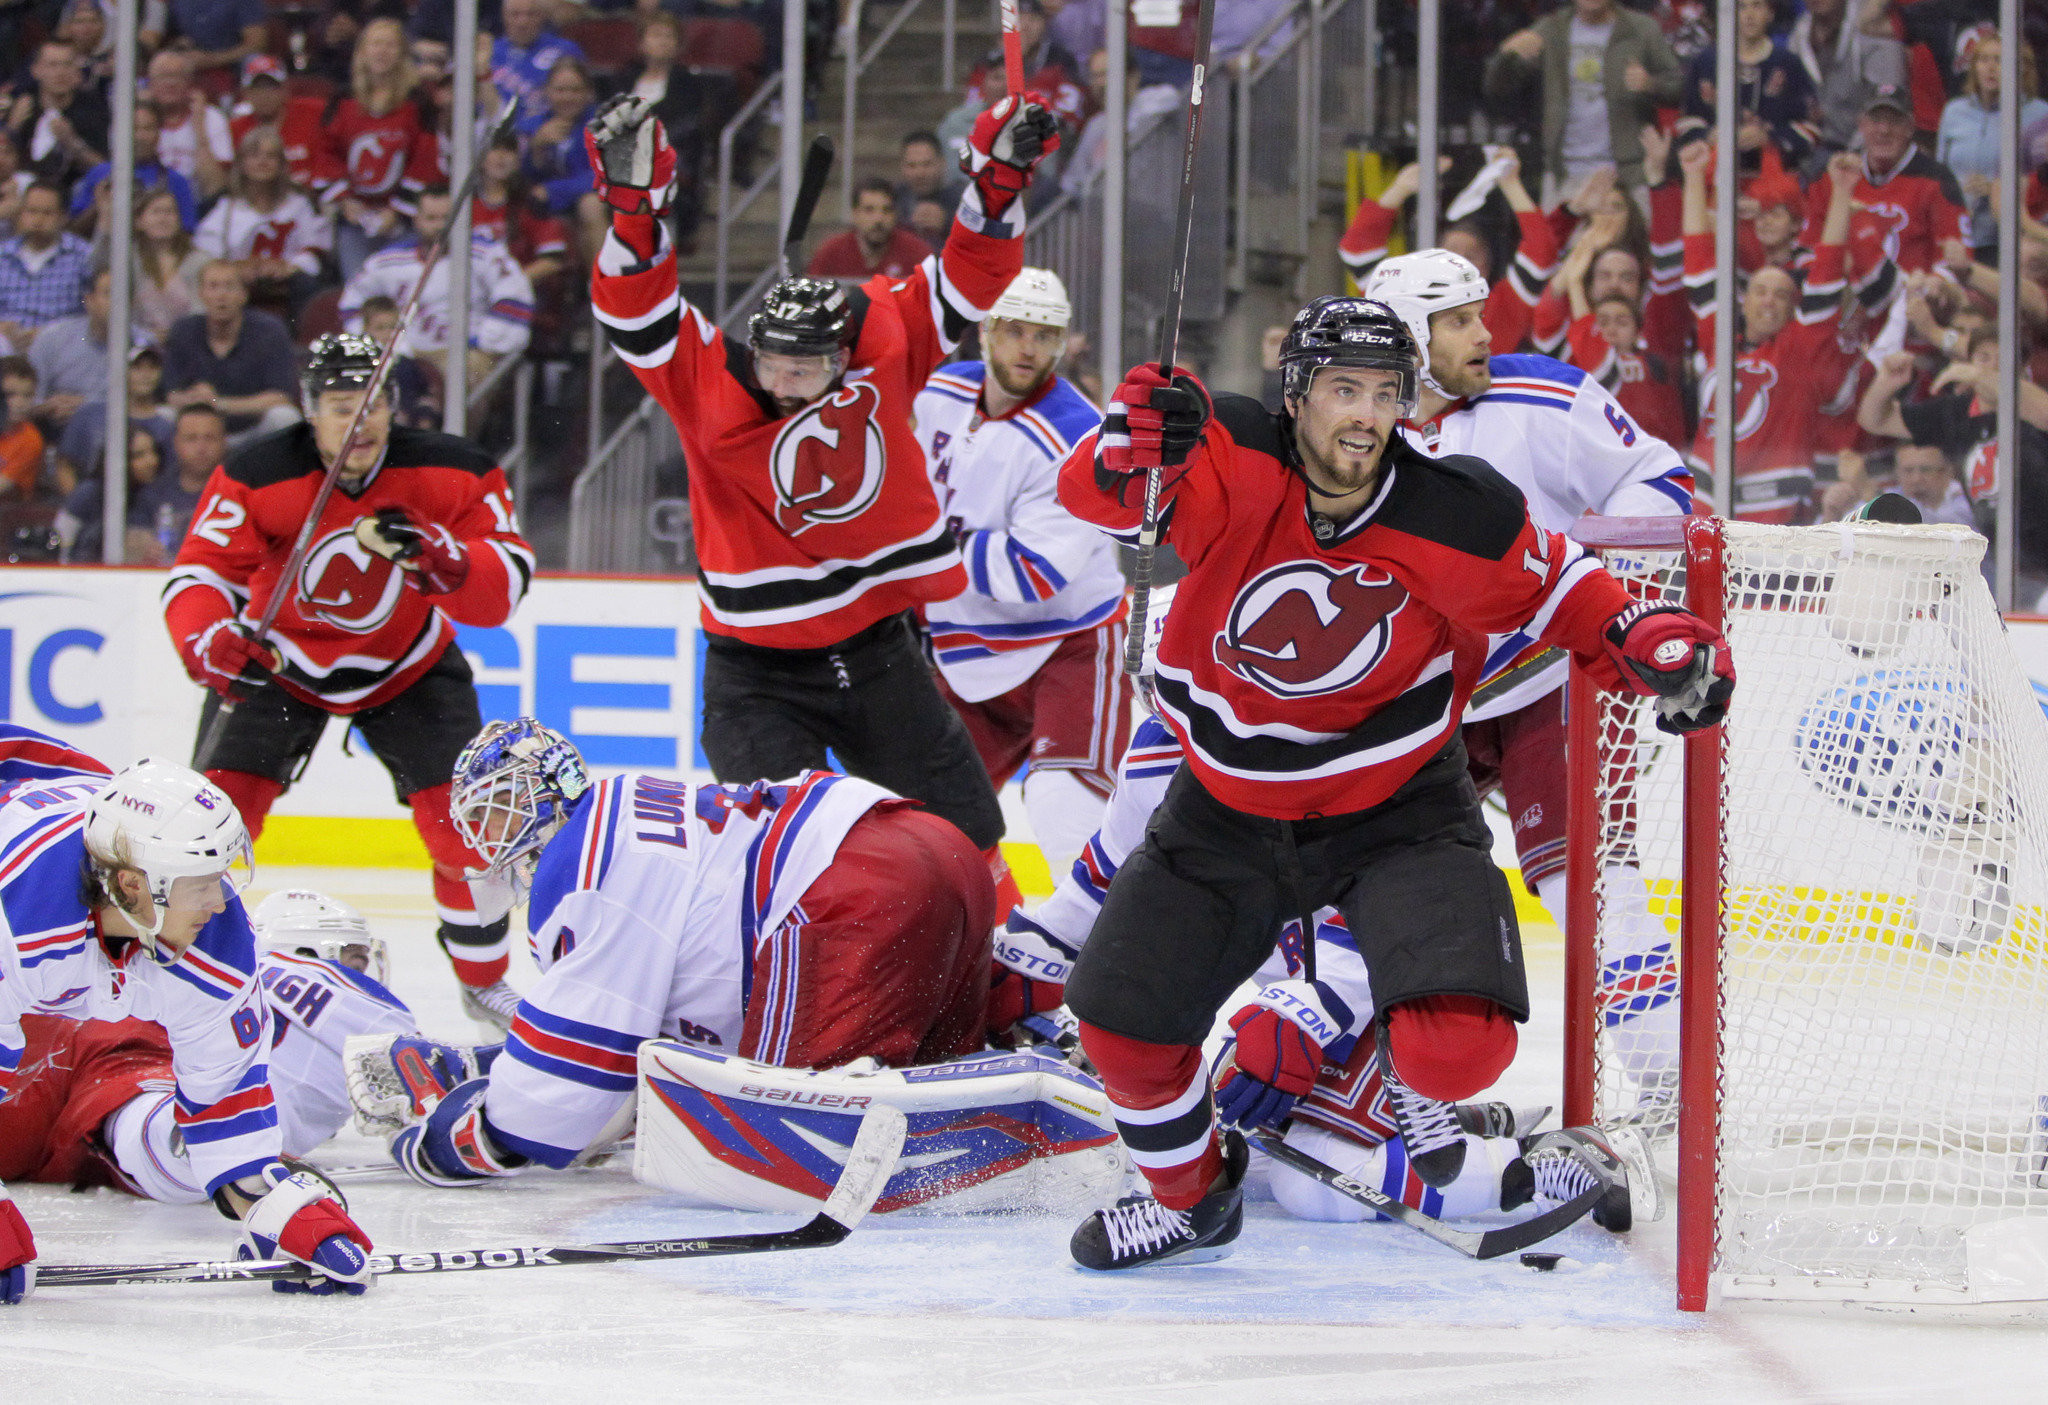 2048x1405 This in the New Jersey Devils beating the New York Rangers in the Eastern  Conference Finals. Adam Henrique scored the winning goal.